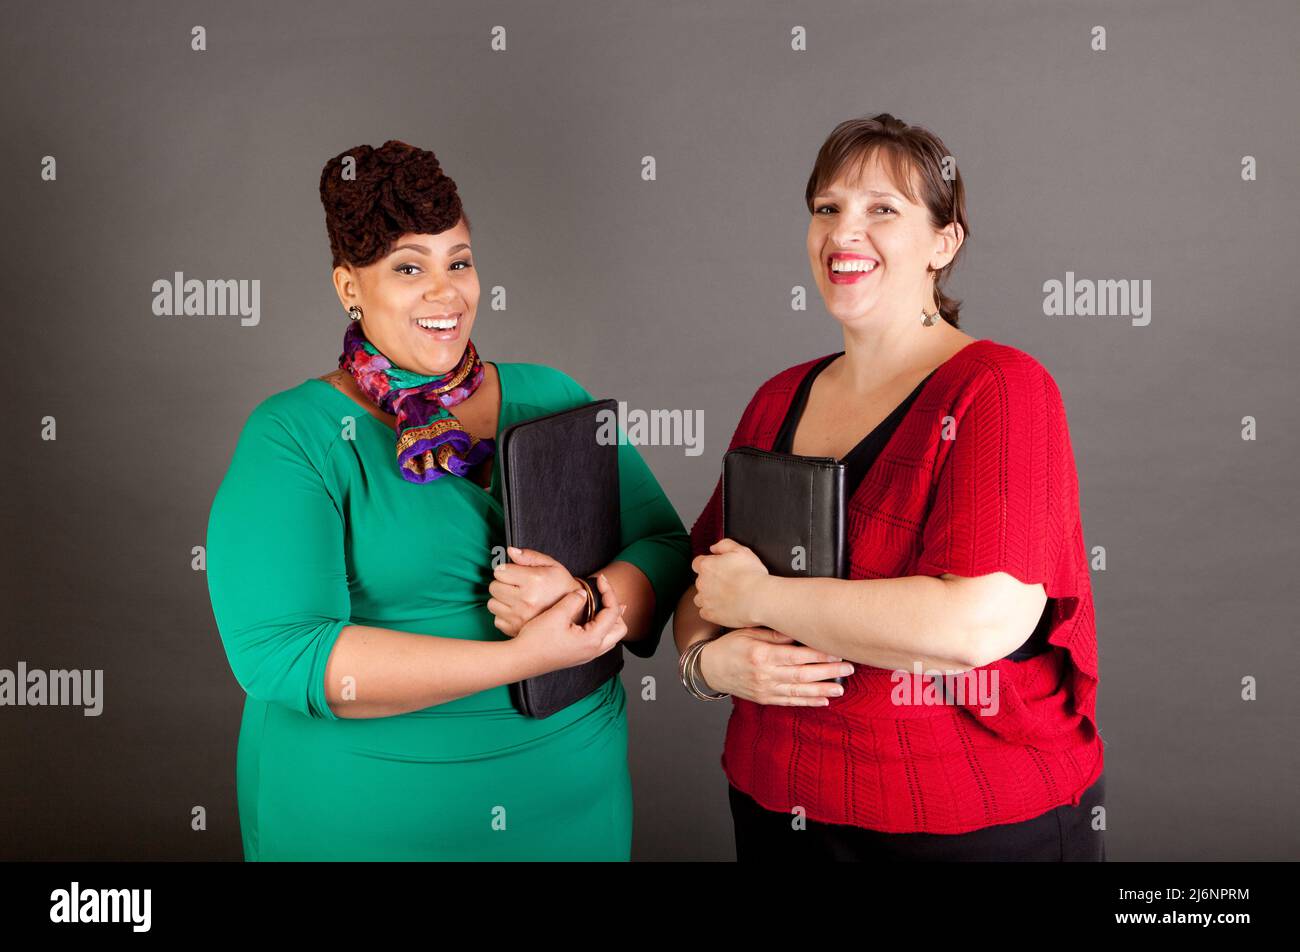 Happy, smiling plus size women of different races looking at the camera wearing bold colors holding traditional business portfolios Stock Photo